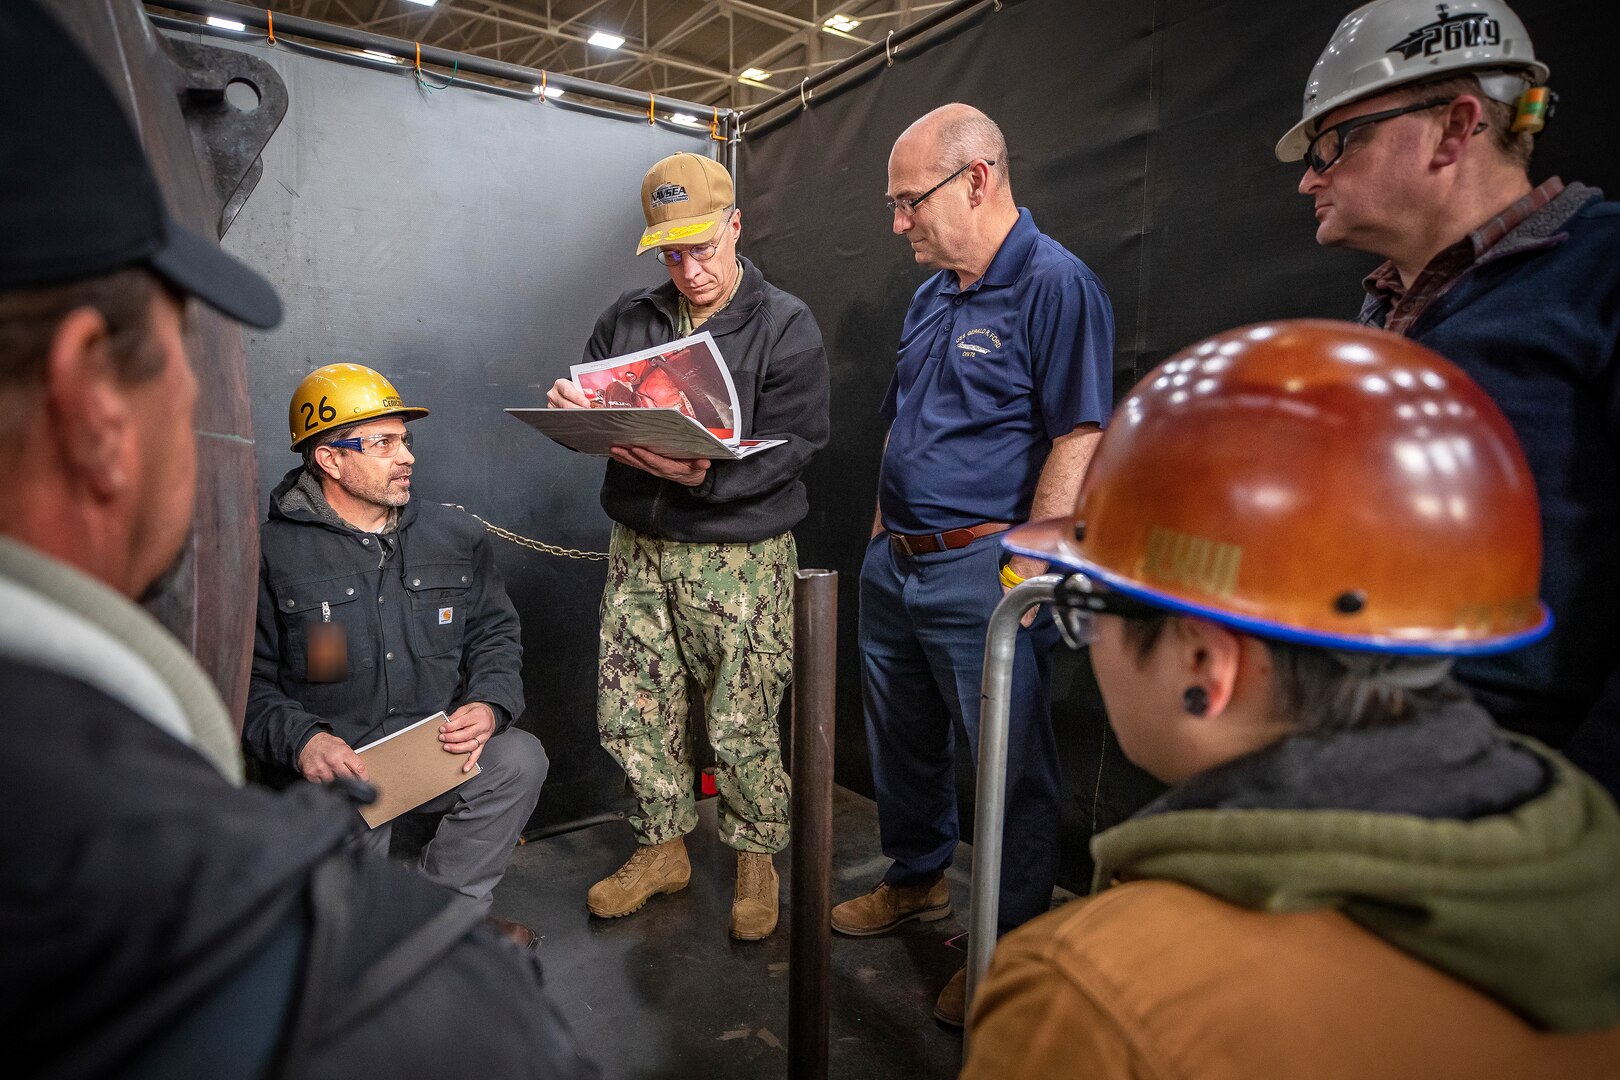 Tracy Hartz, lower right, work leader, Shop 26, Welders, listens as Ronald Cenicola, left, Non-Nuclear director, Shop 26, briefs Rear Adm. Jason Lloyd, middle, Chief Engineer and Deputy Commander of Ship Design, Integration and Naval Engineering, NAVSEA 05, and Doug Vaughters, right, CVN Design and System Engineering Director for NAVSEA 05, on Shop 31 operations during a tour March 31, 2022, of Puget Sound Naval Shipyard & Intermediate Maintenance Facility in Bremerton, Washington. (PSNS & IMF photo by Scott Hansen)